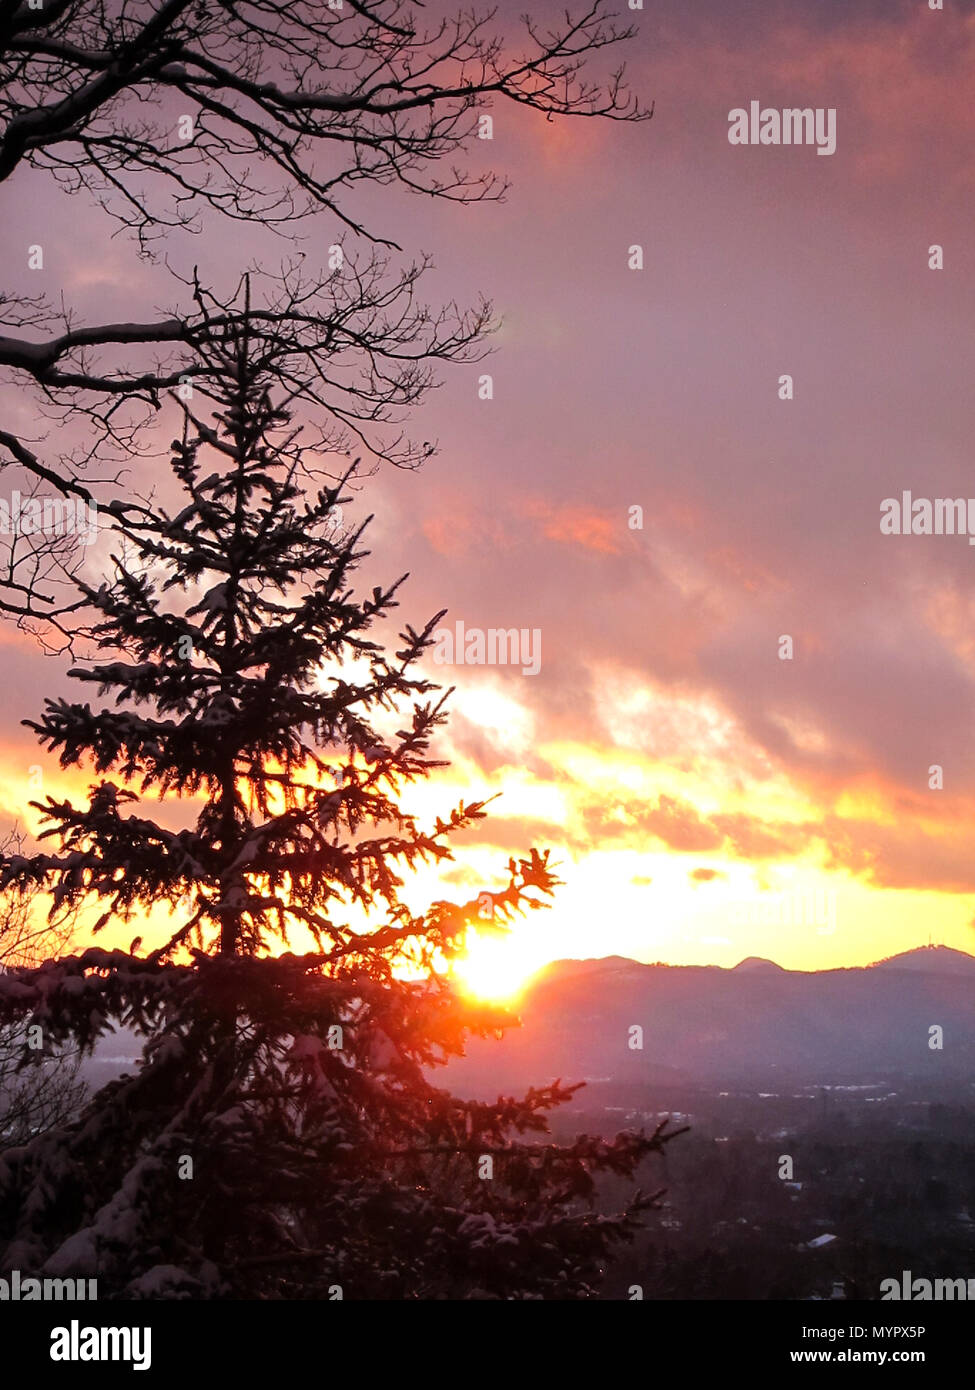 Winter view of the Blue Ridge Mountains at sunset through silhouette of Blue Spruce and White Oak trees. Asheville, North Carolina. Stock Photo